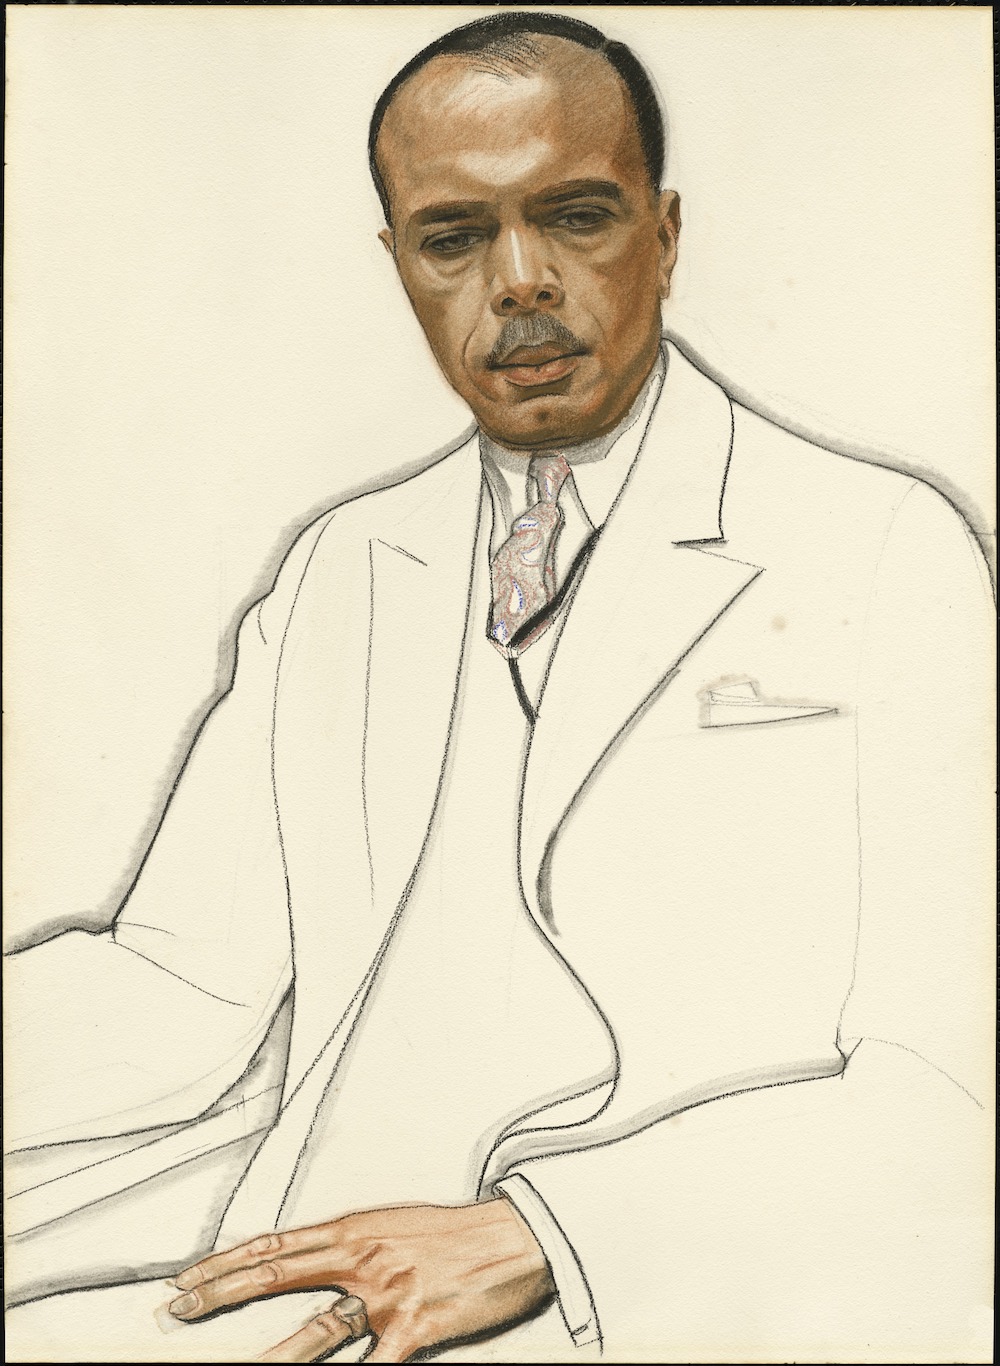 A drawing of James Weldon Johnson, seated and wearing a white suit.